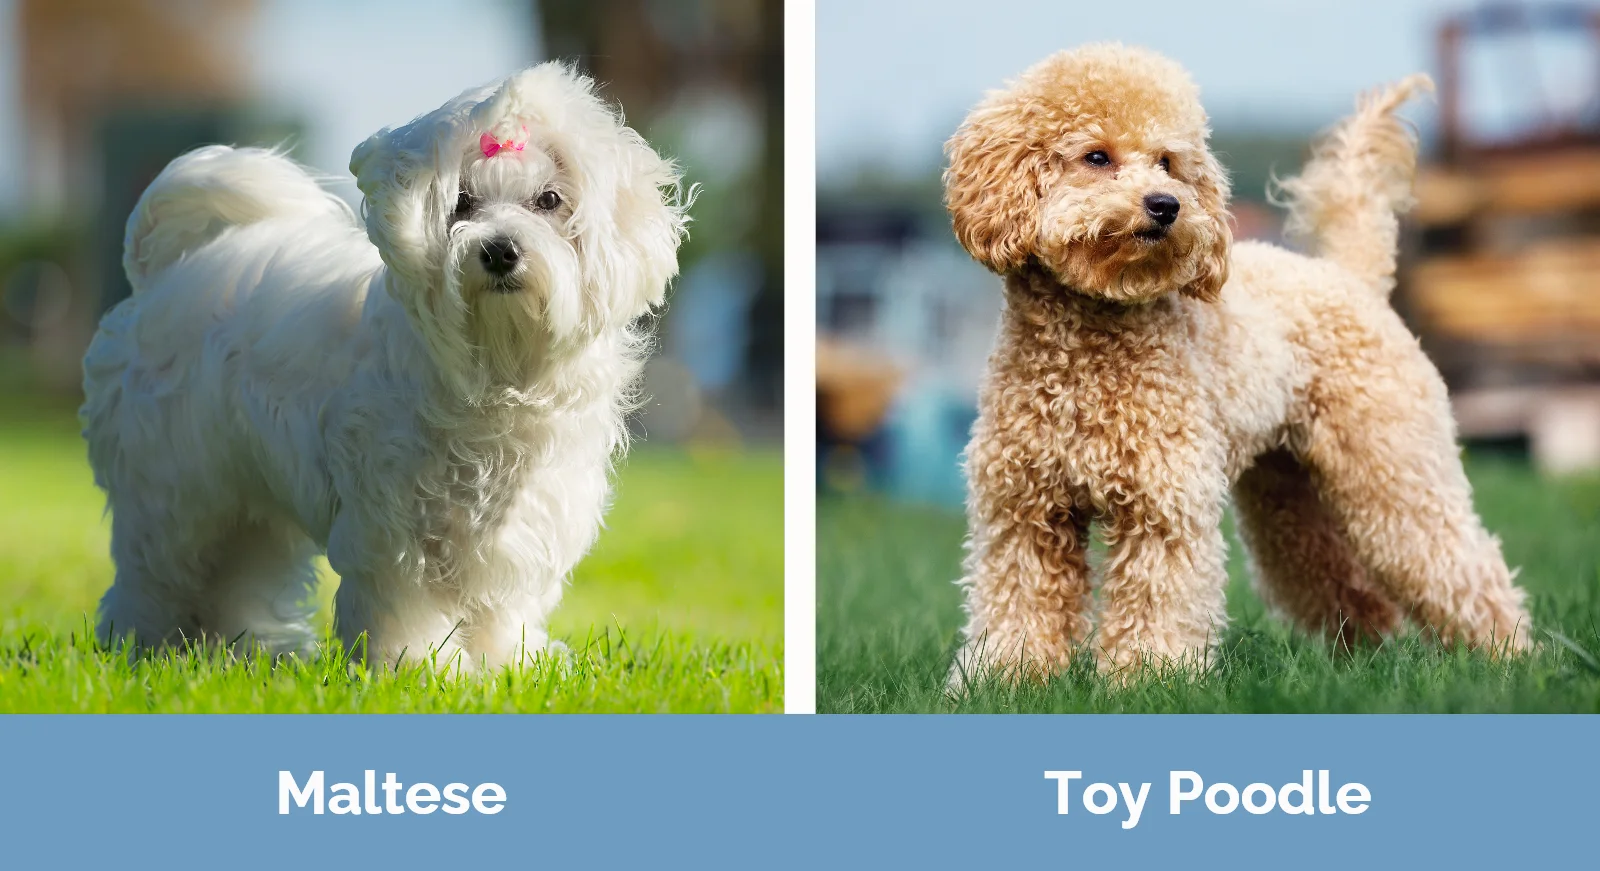 https://www.hepper.com/wp-content/uploads/2020/04/Maltese-vs-Toy-Poodle-Visual-Differences-tsik-Shutterstock-Linas-T-Shutterstock.webp